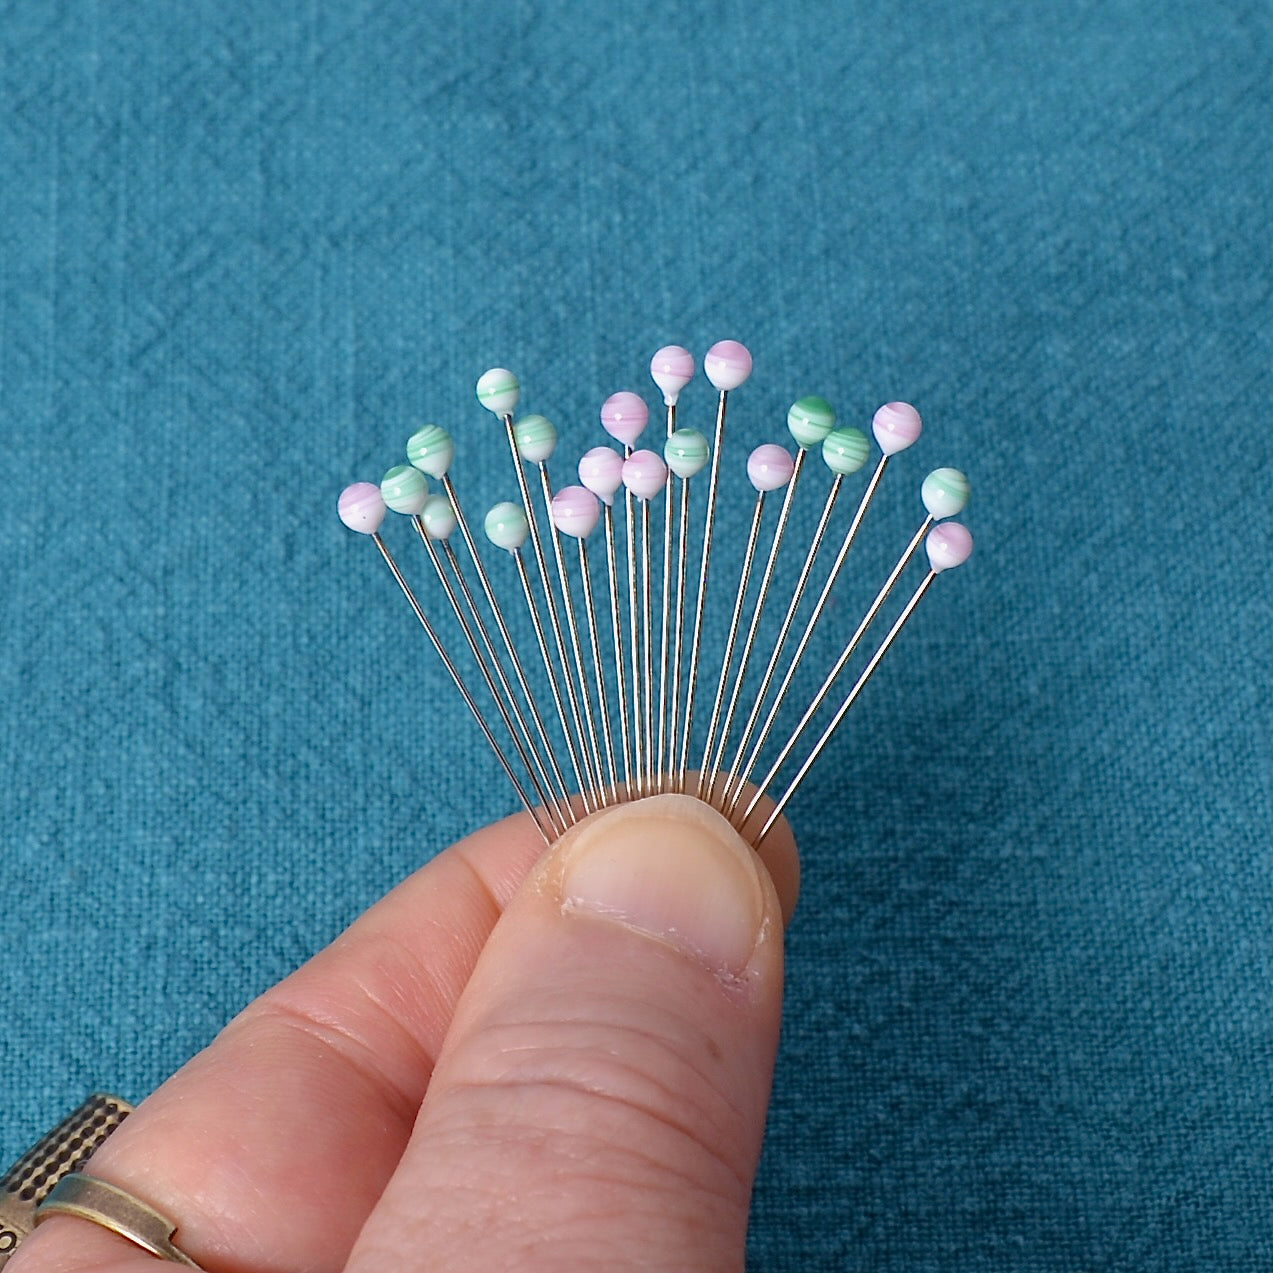 Sewing Pins, Straight Pins for Fabric, Black/ White Ball Head Quilting Pins  Long